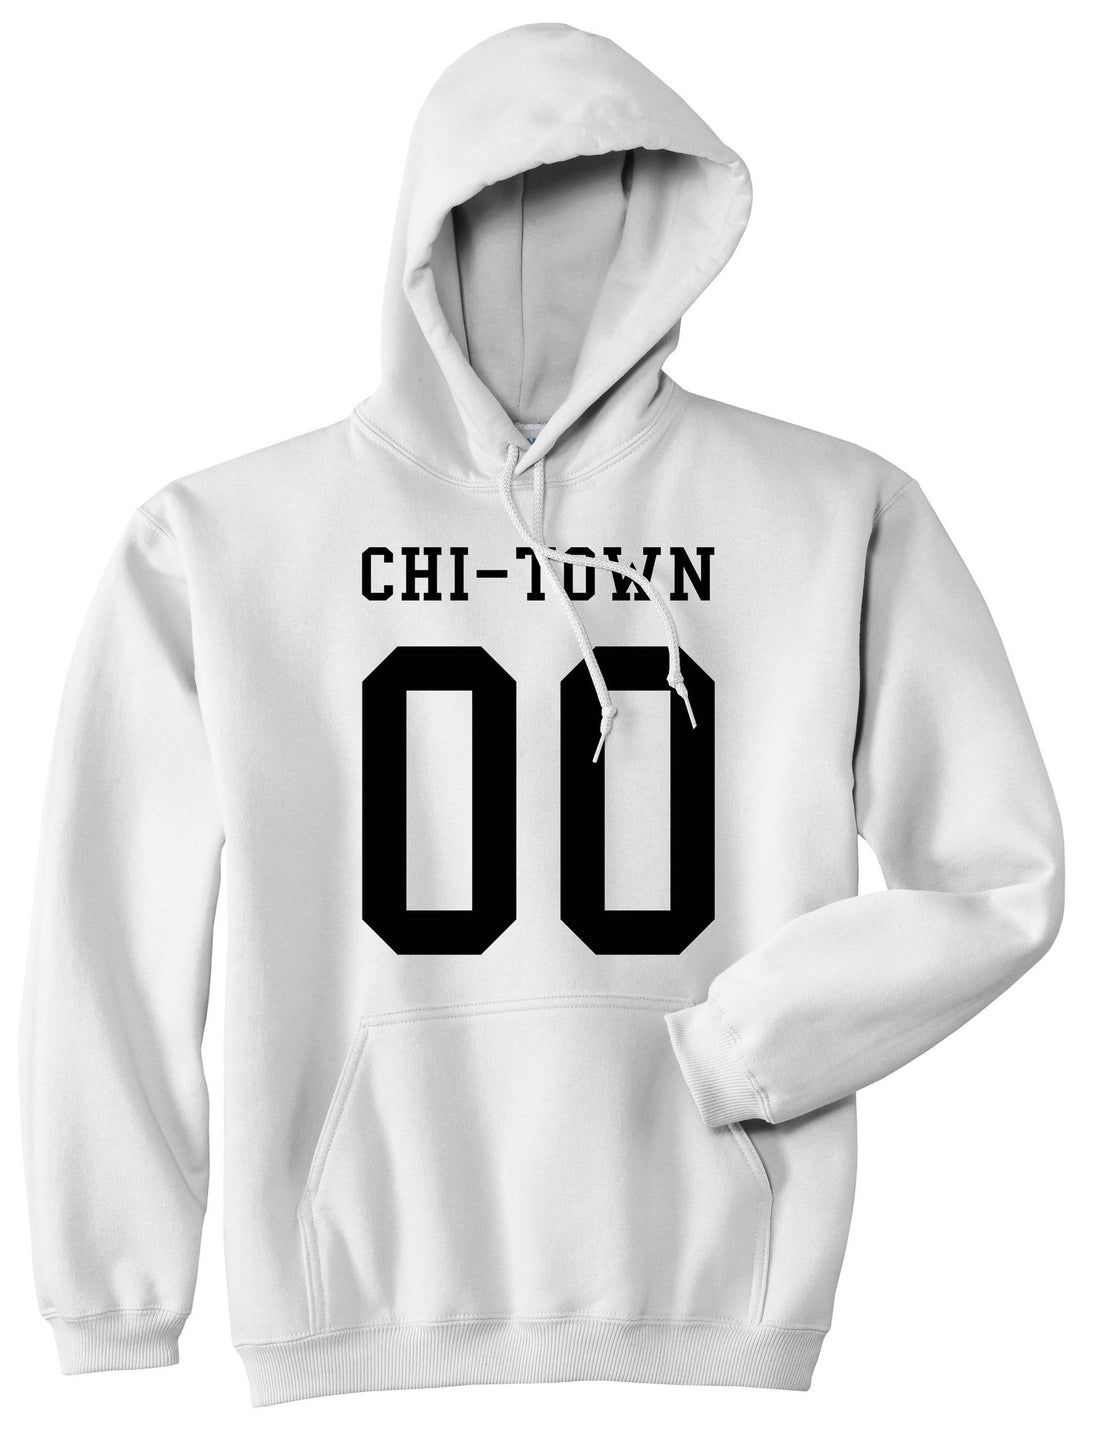 Chitown Team 00 Chicago Jersey Pullover Hoodie in White By Kings Of NY